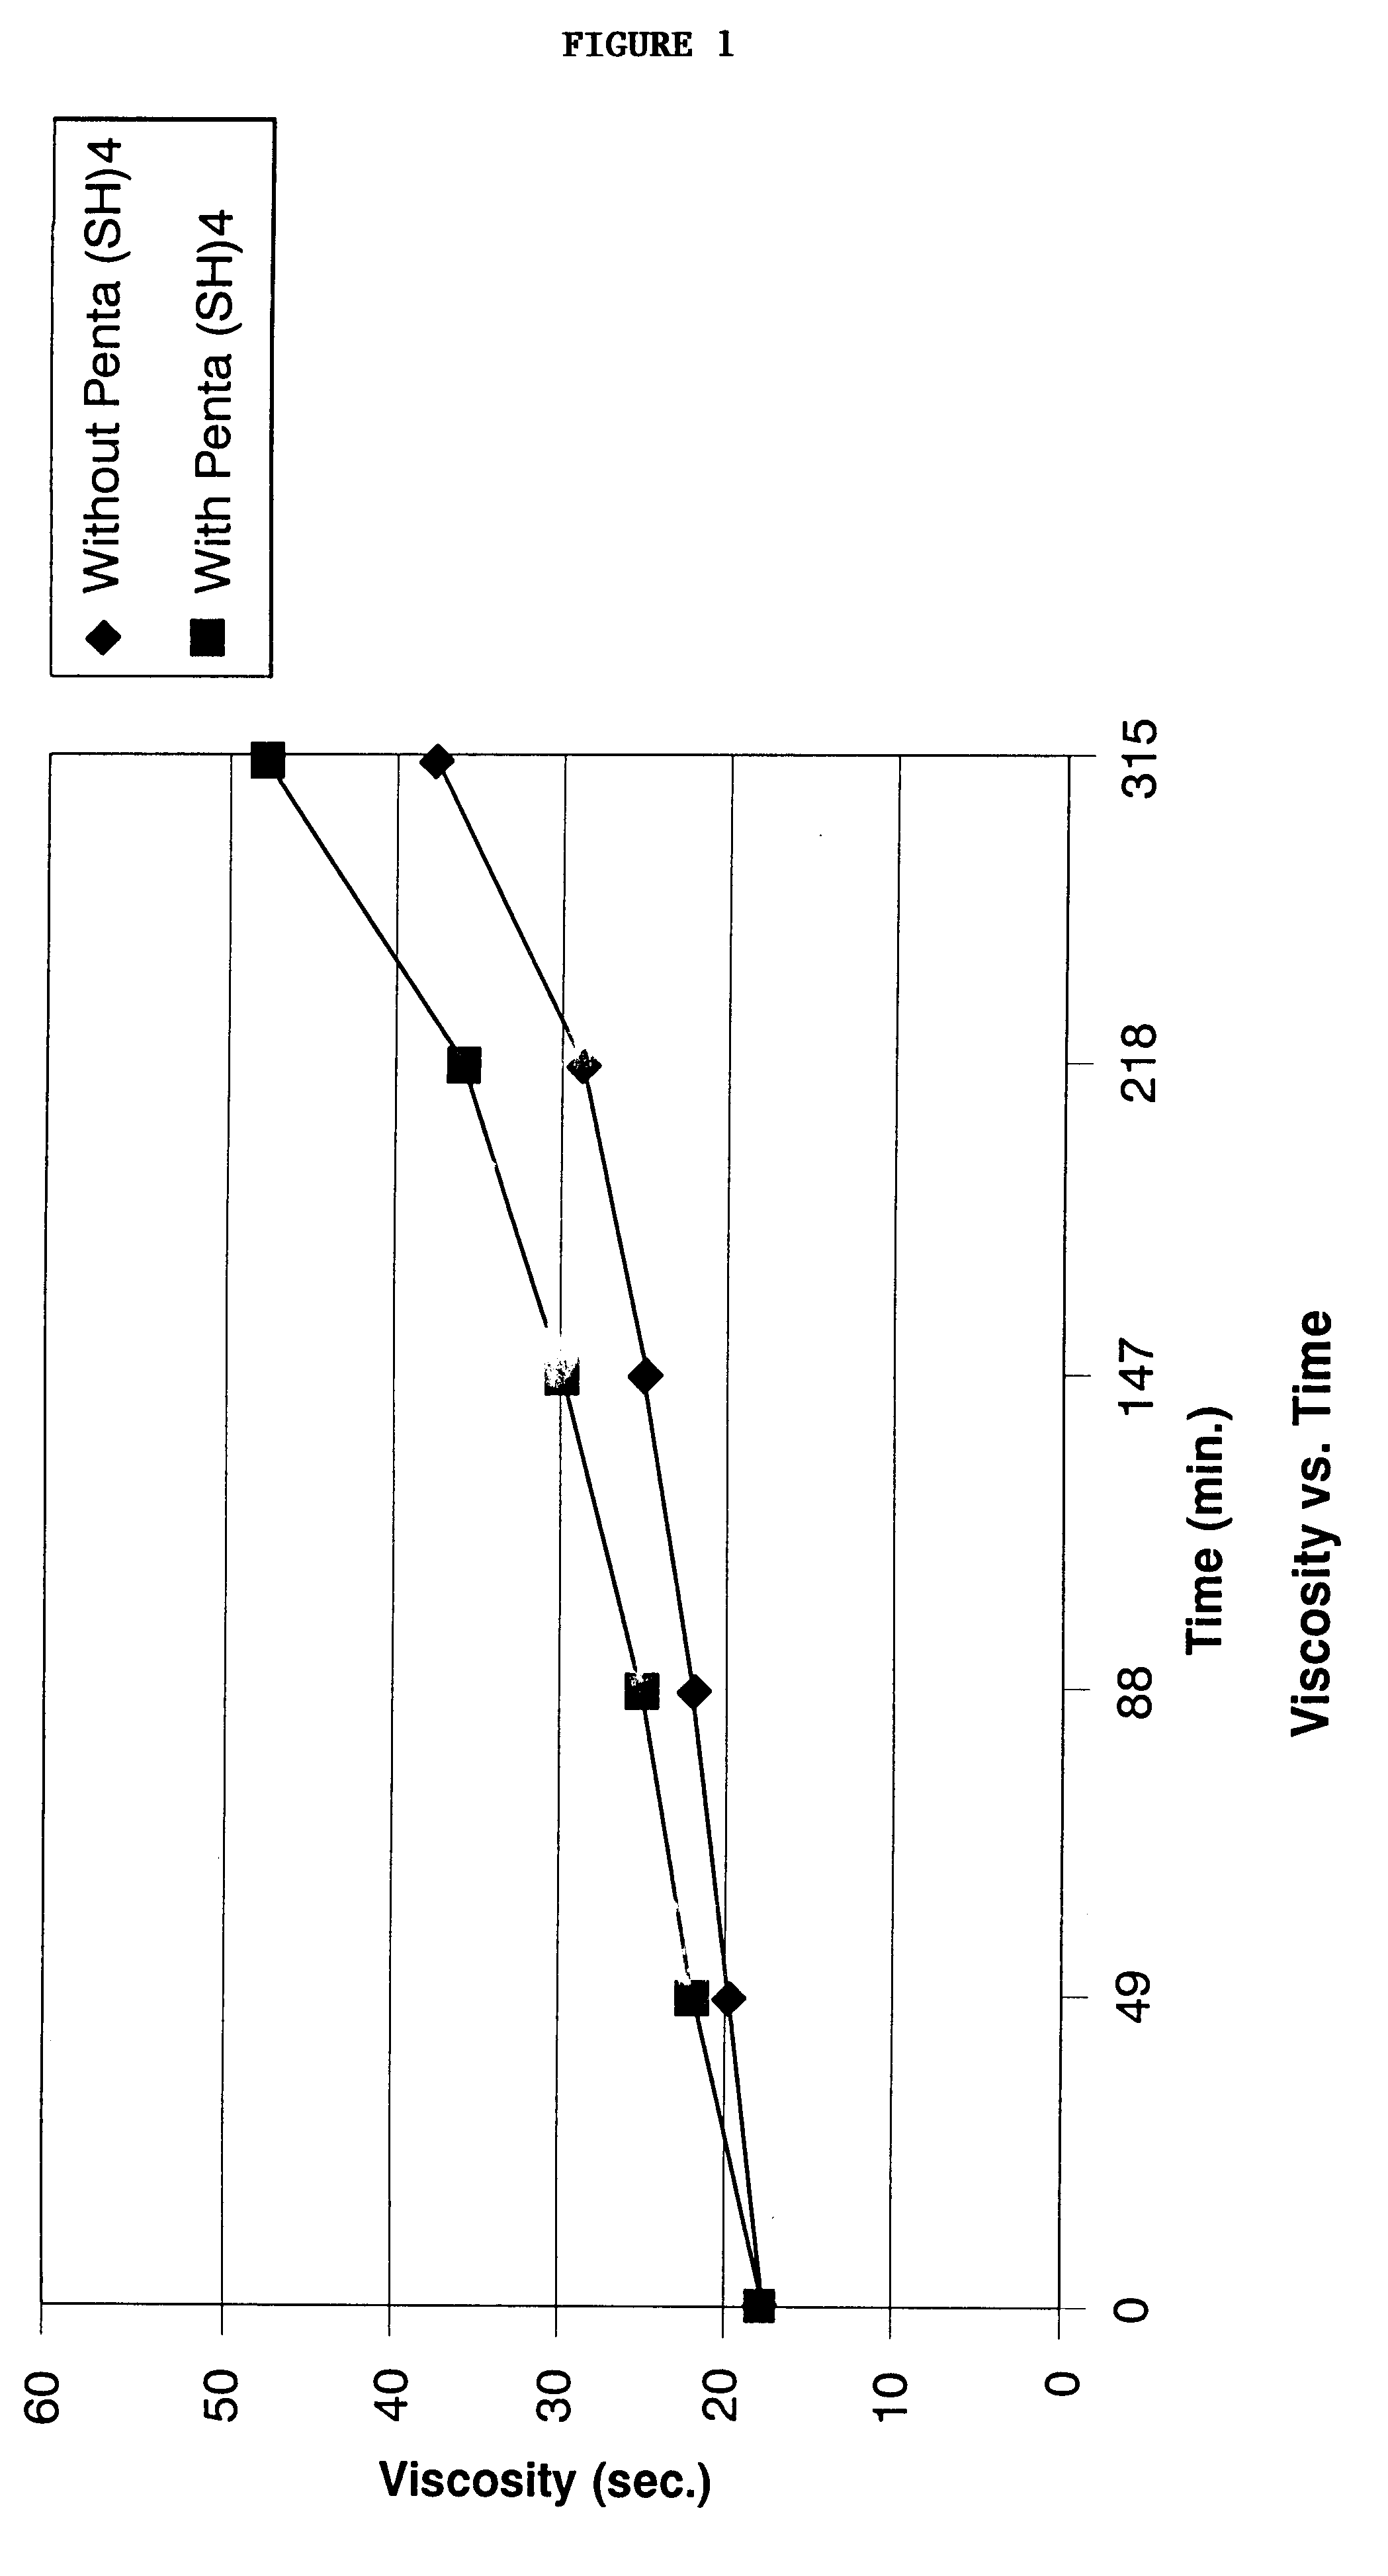 Coating composition comprising a bicyclo-orthoester-functional compound, an isocyanate-functional compound, and a thiol-functional compound